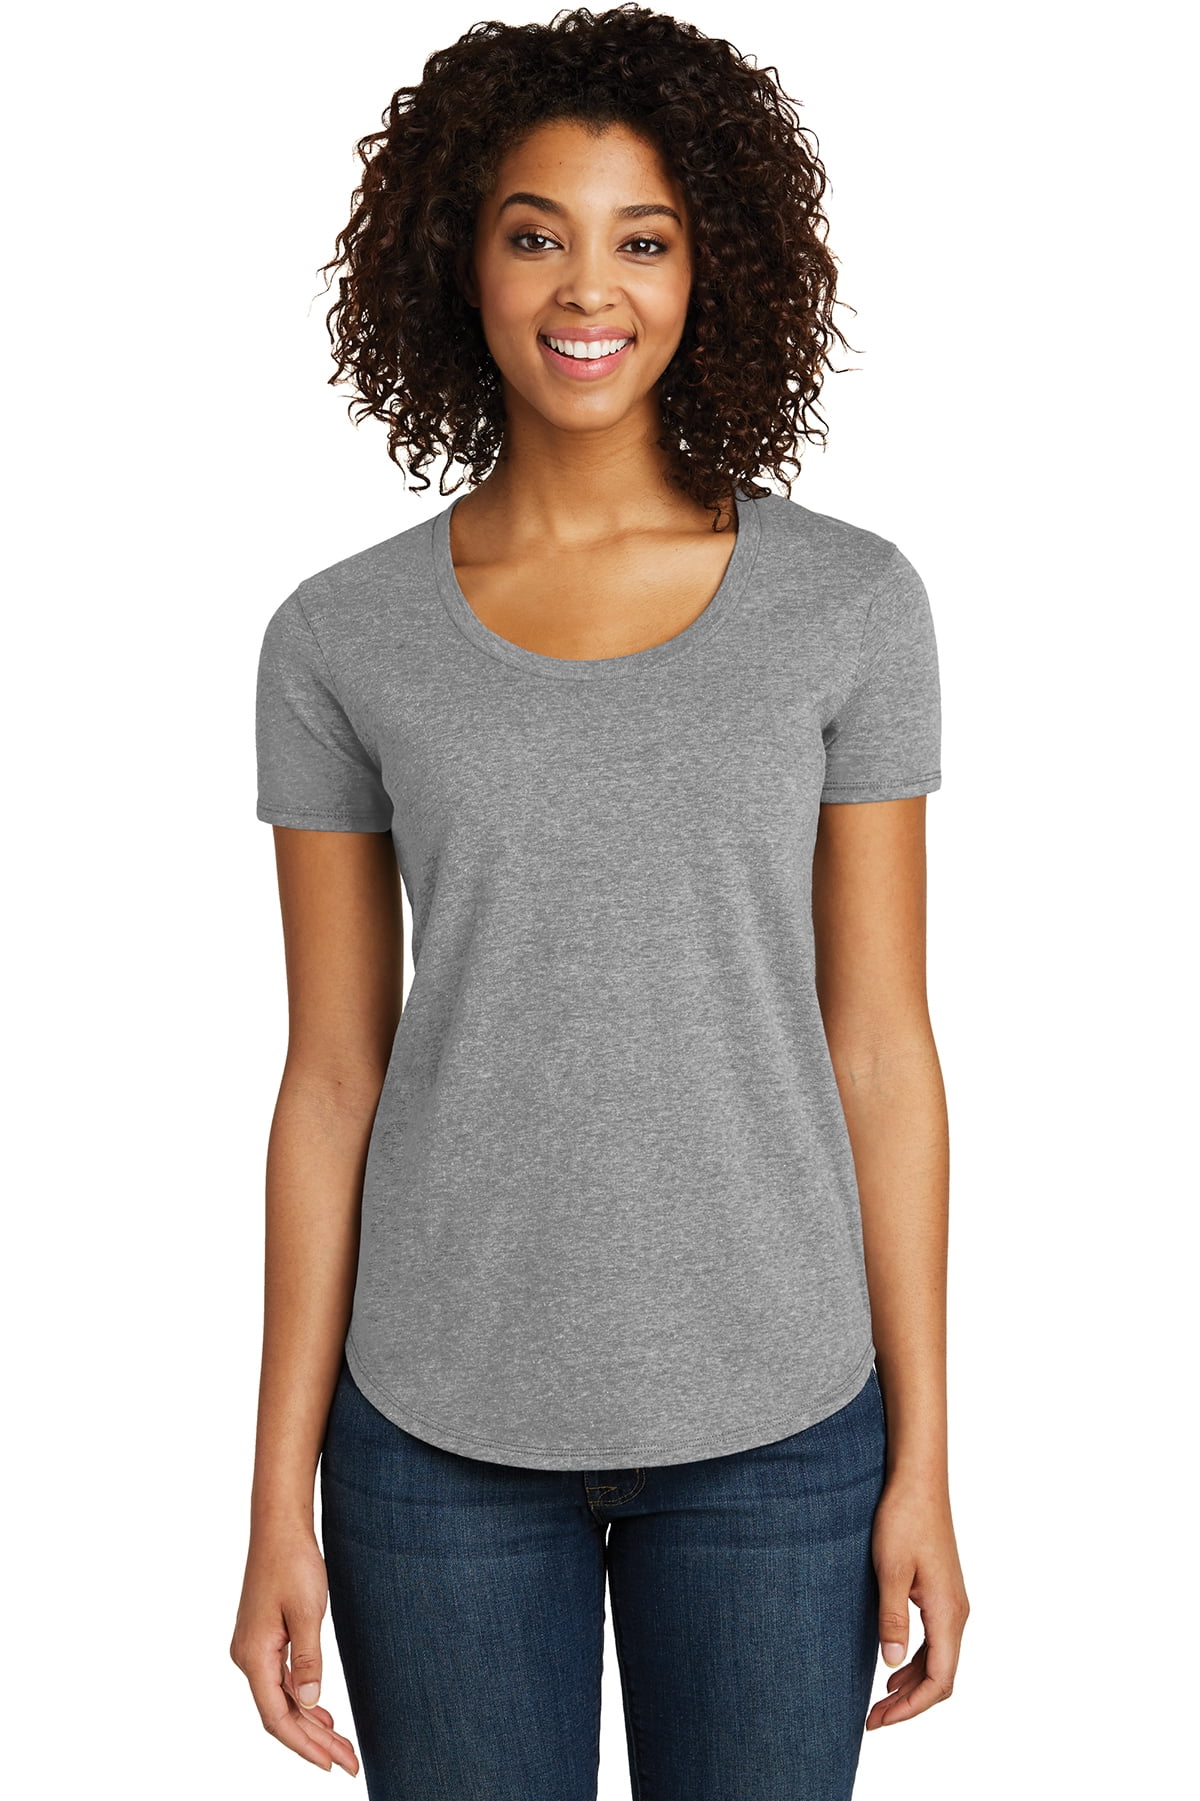 JustBlanks Women's Short Sleeve Fitted Very Important Tee 4.3